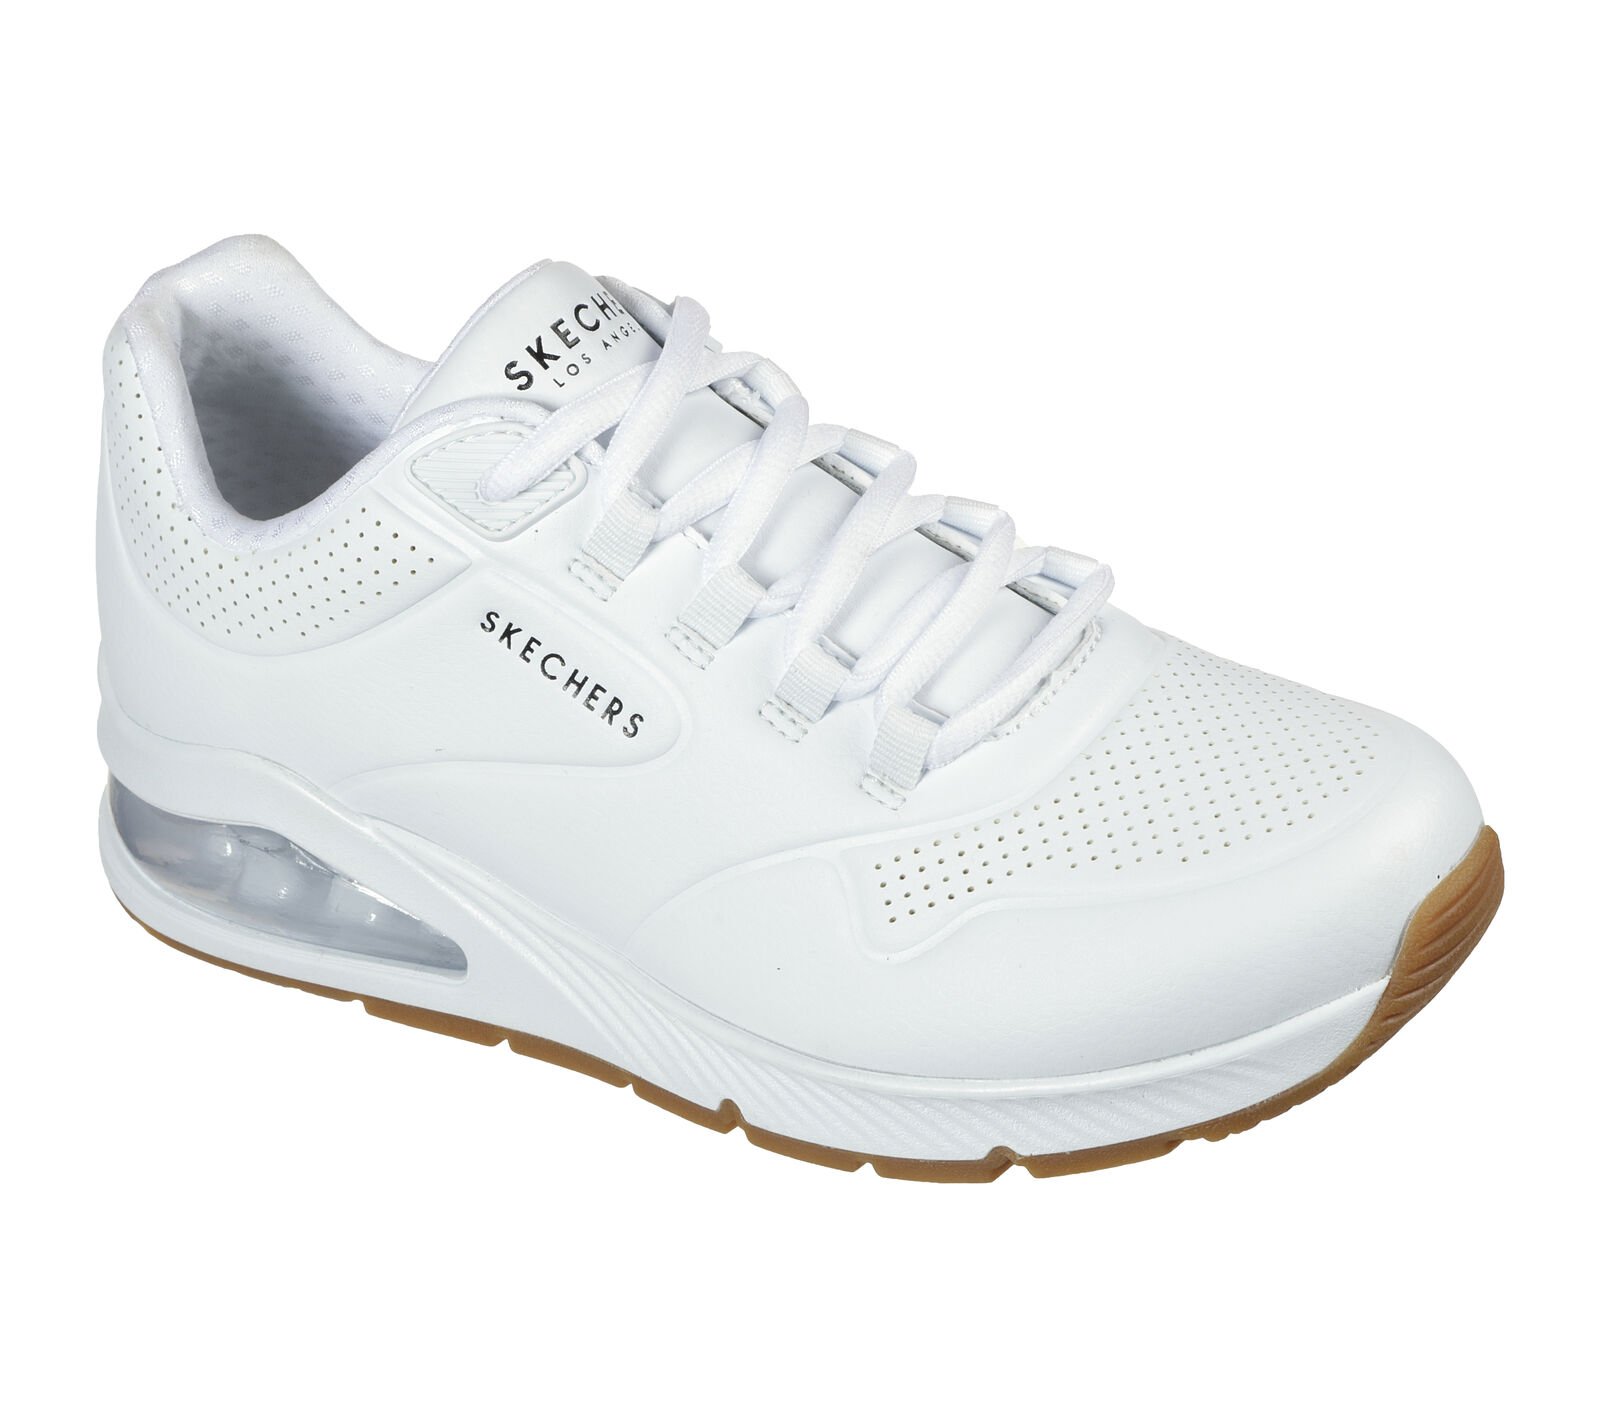 Shop the Uno 2 - Air Around You | SKECHERS